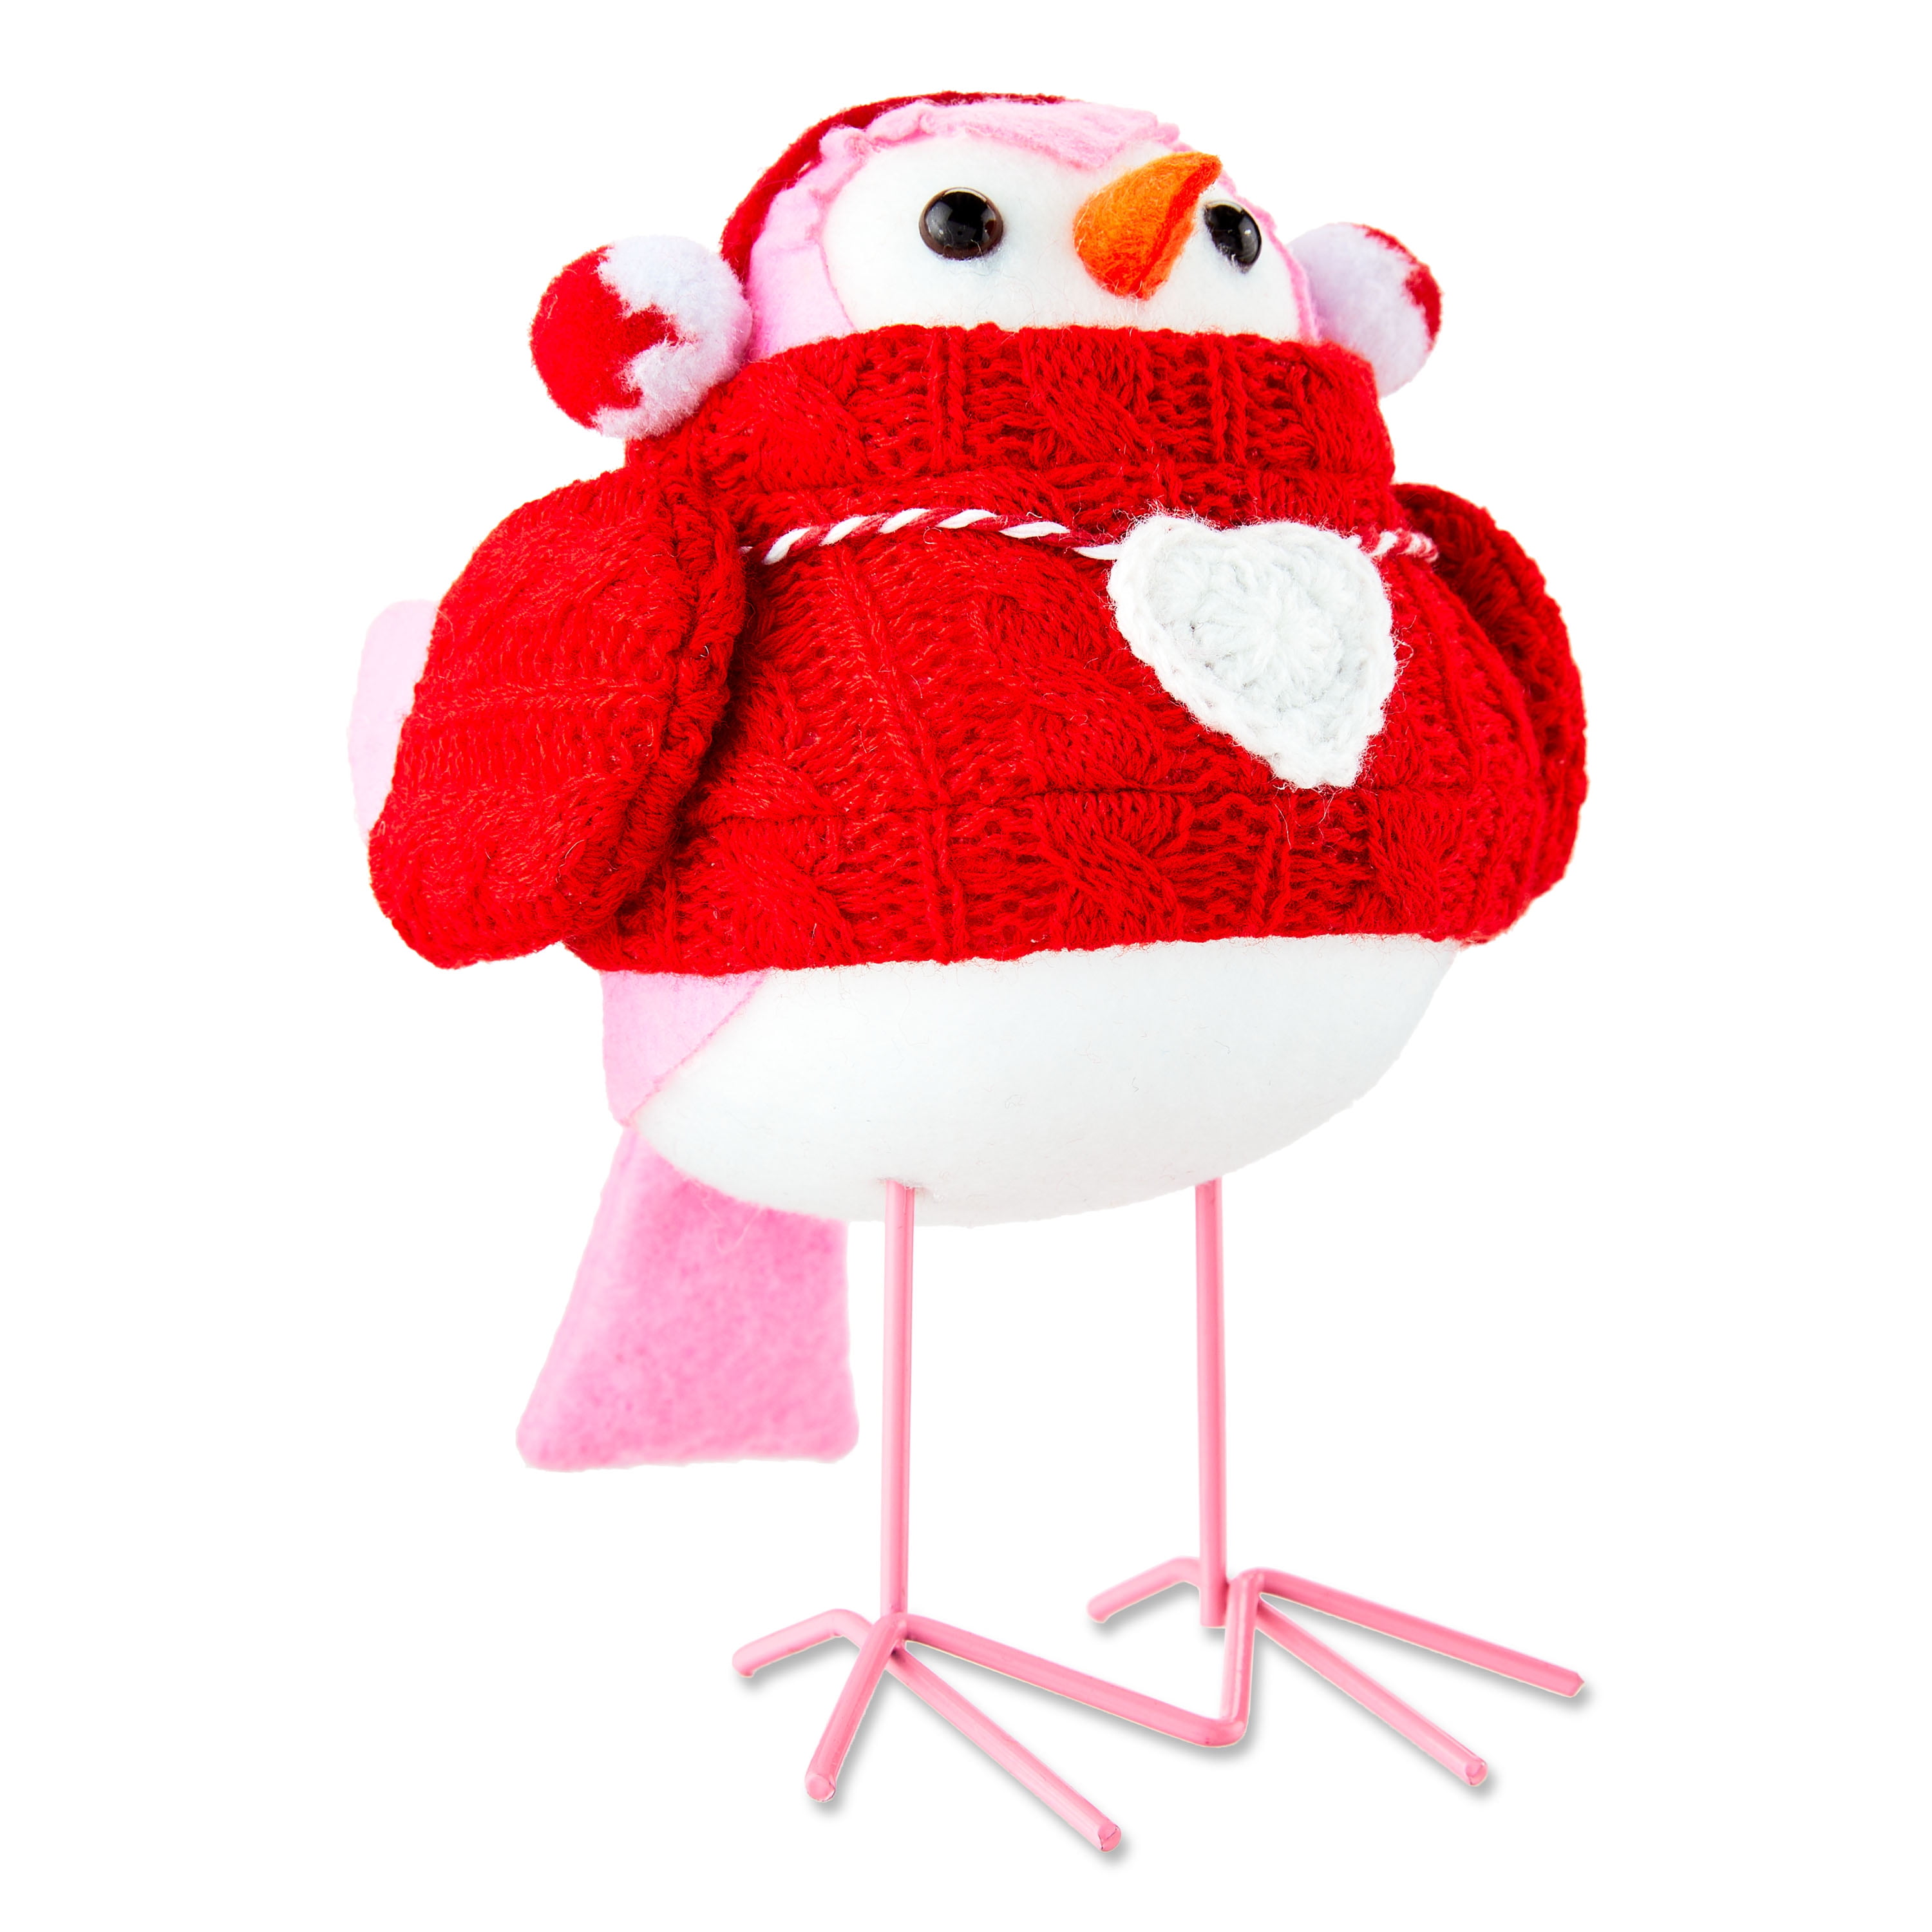 WAY TO CELEBRATE! Way To Celebrate Valentine's Day Fabric Bird with Red Coat Tabletop Decoration, 7" Tall